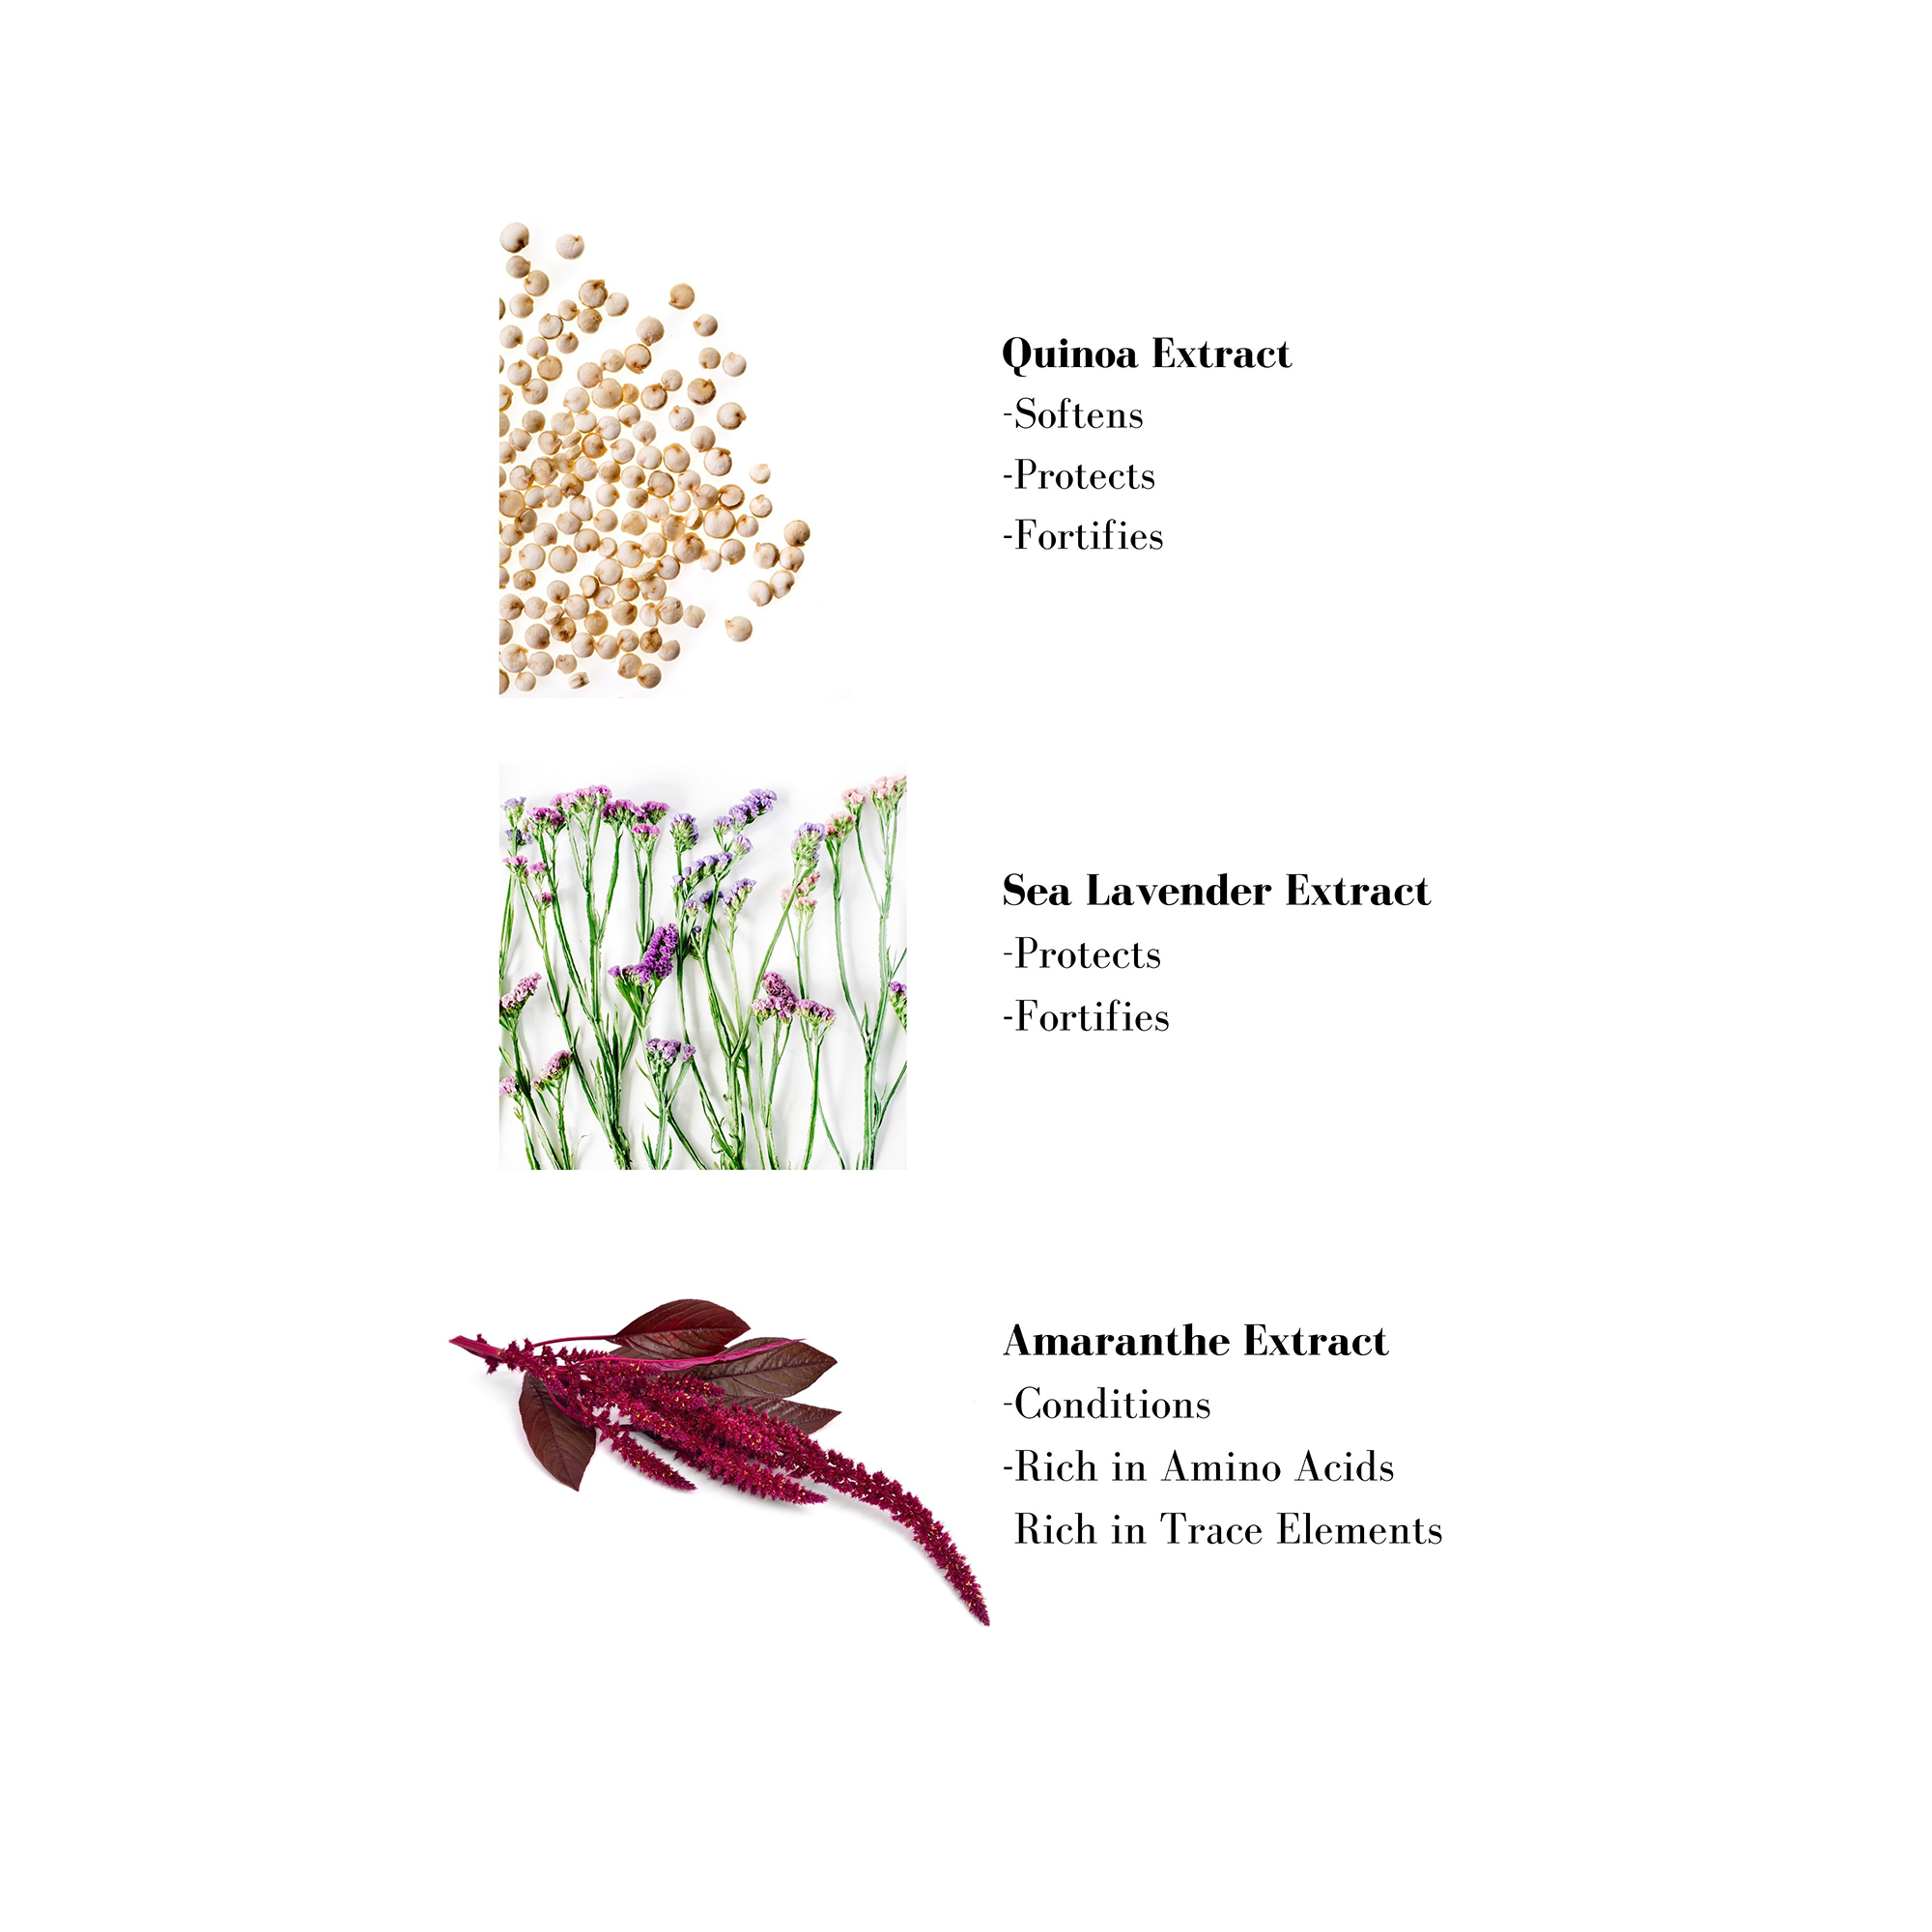 Image 1- Quinoa Extract -Softens -Protects -Fortifies Sea Lavender Extract - Protects -Fortifies Amaranthe Extract -Conditions -Rich in Amino Acids Rich in Trace Elements